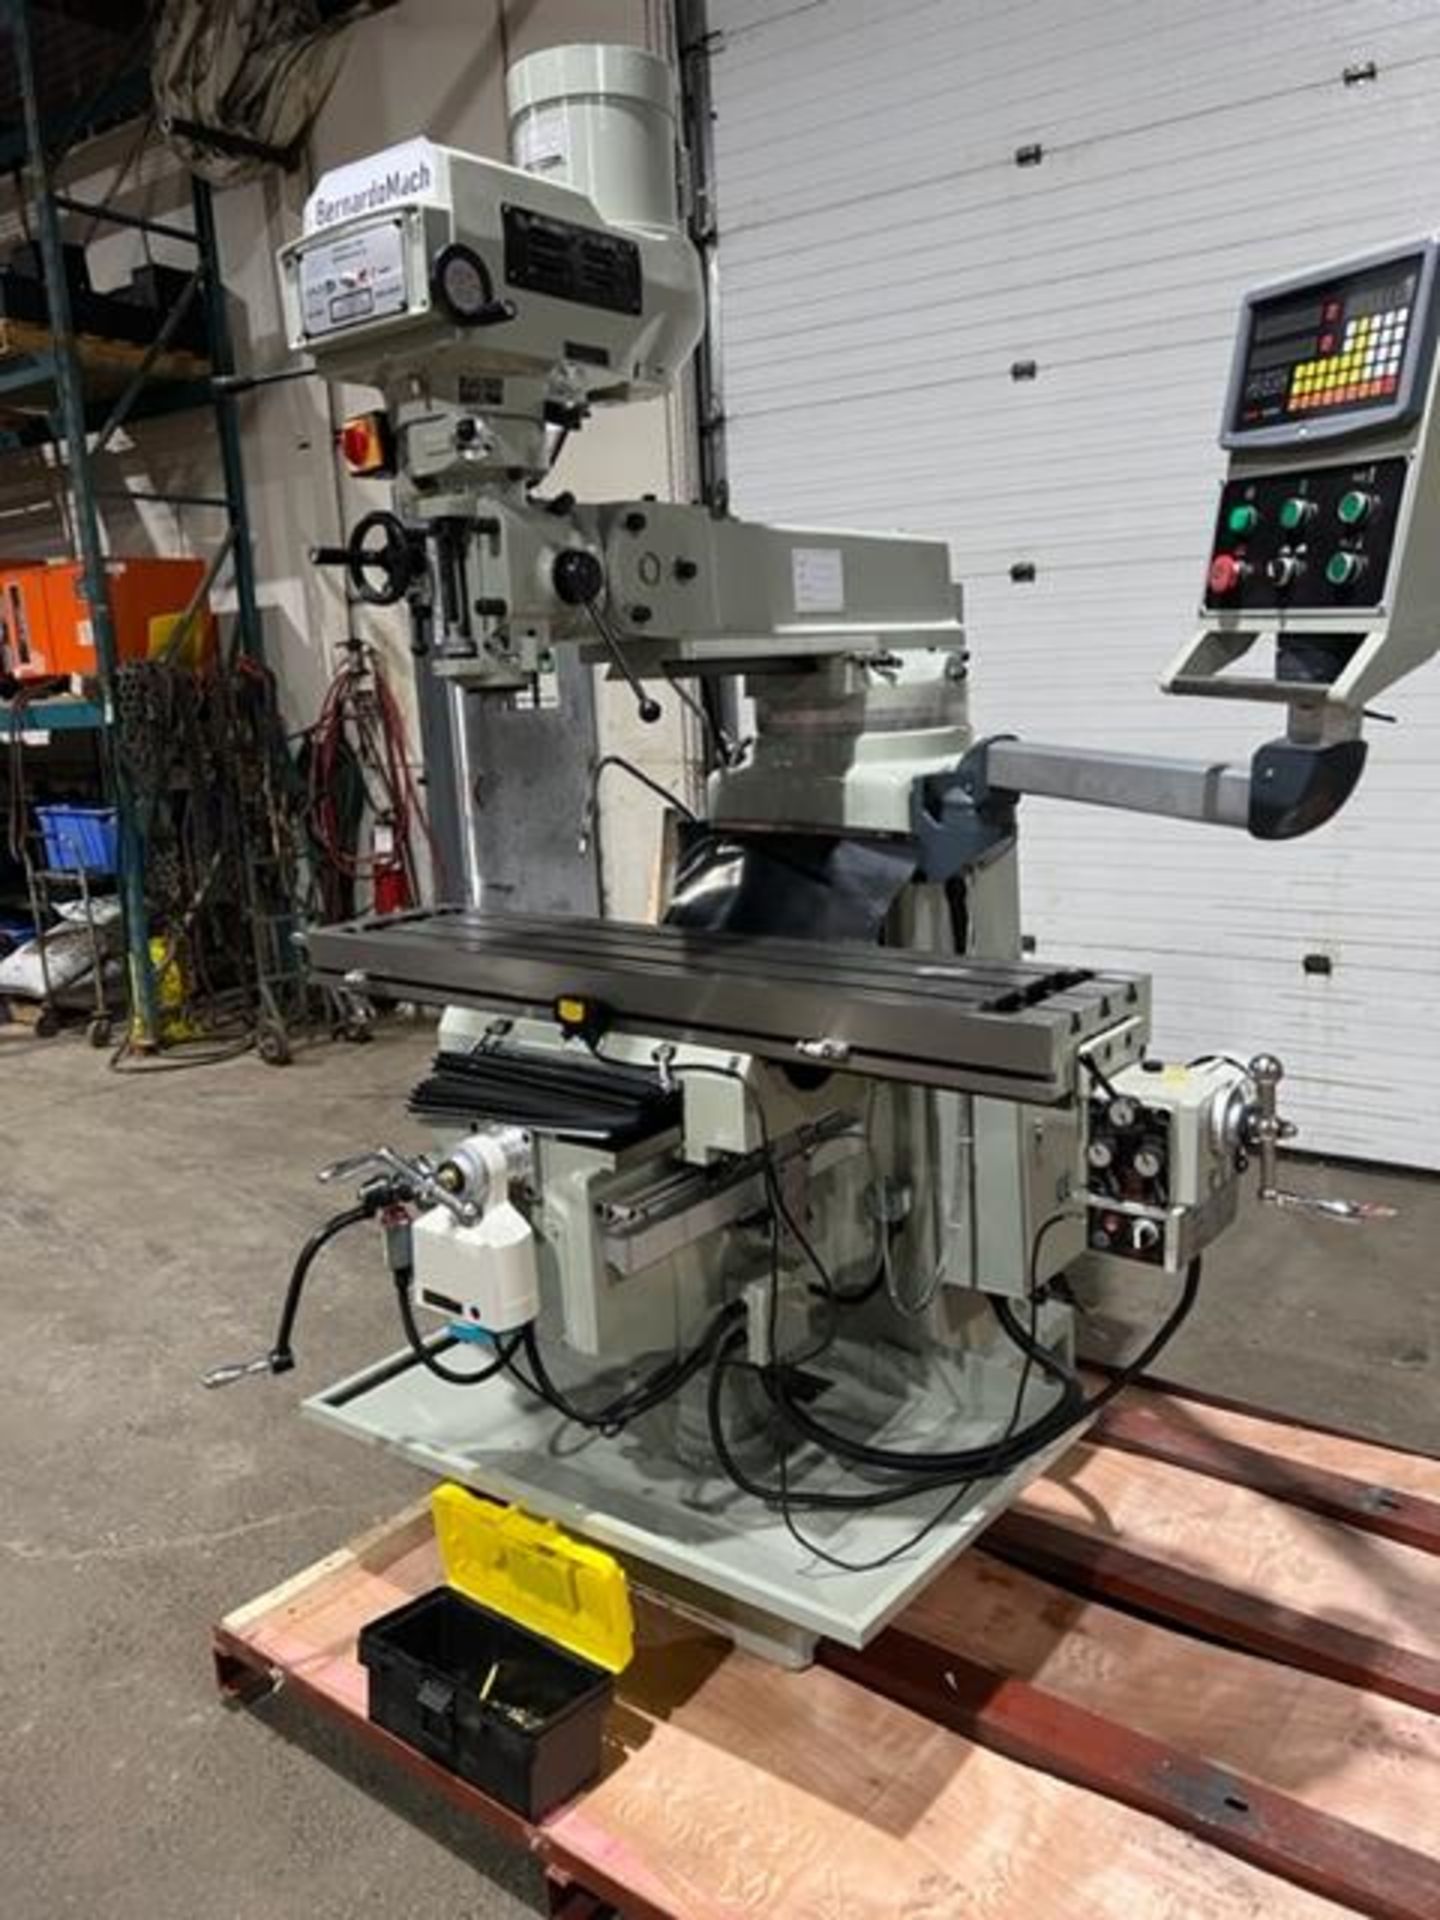 BernardoMach MINT / UNUSED Milling Machine with Full Power Feed Table on ALL AXIS (X, Y and Z) 54" x - Image 5 of 6